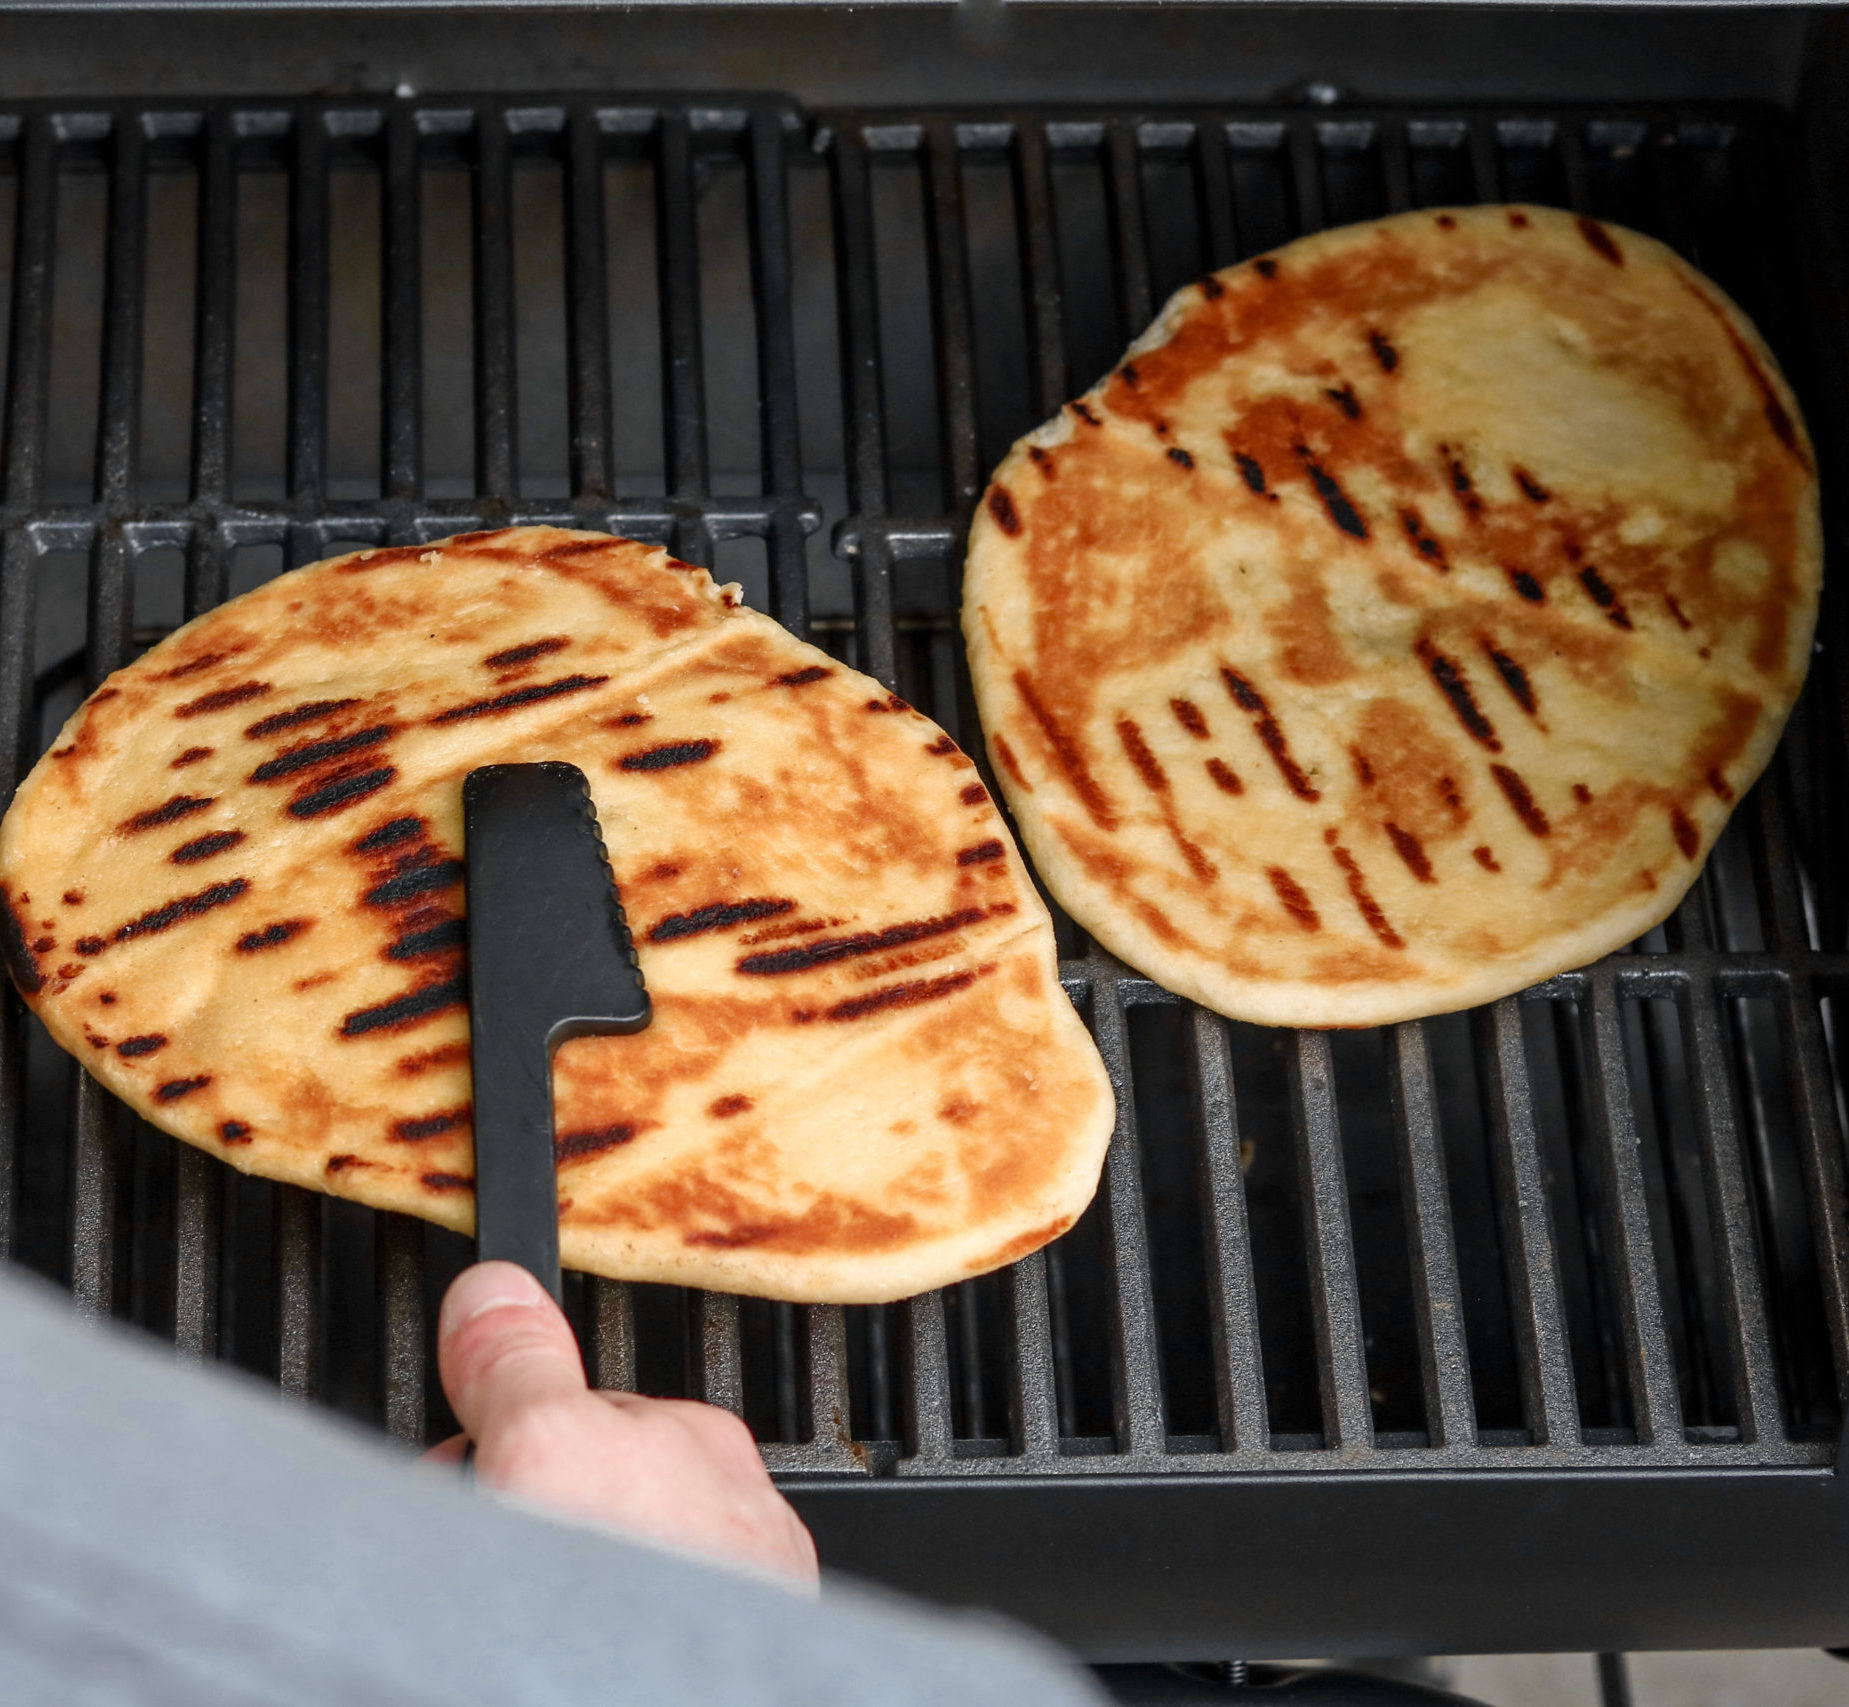 Grilled Naan